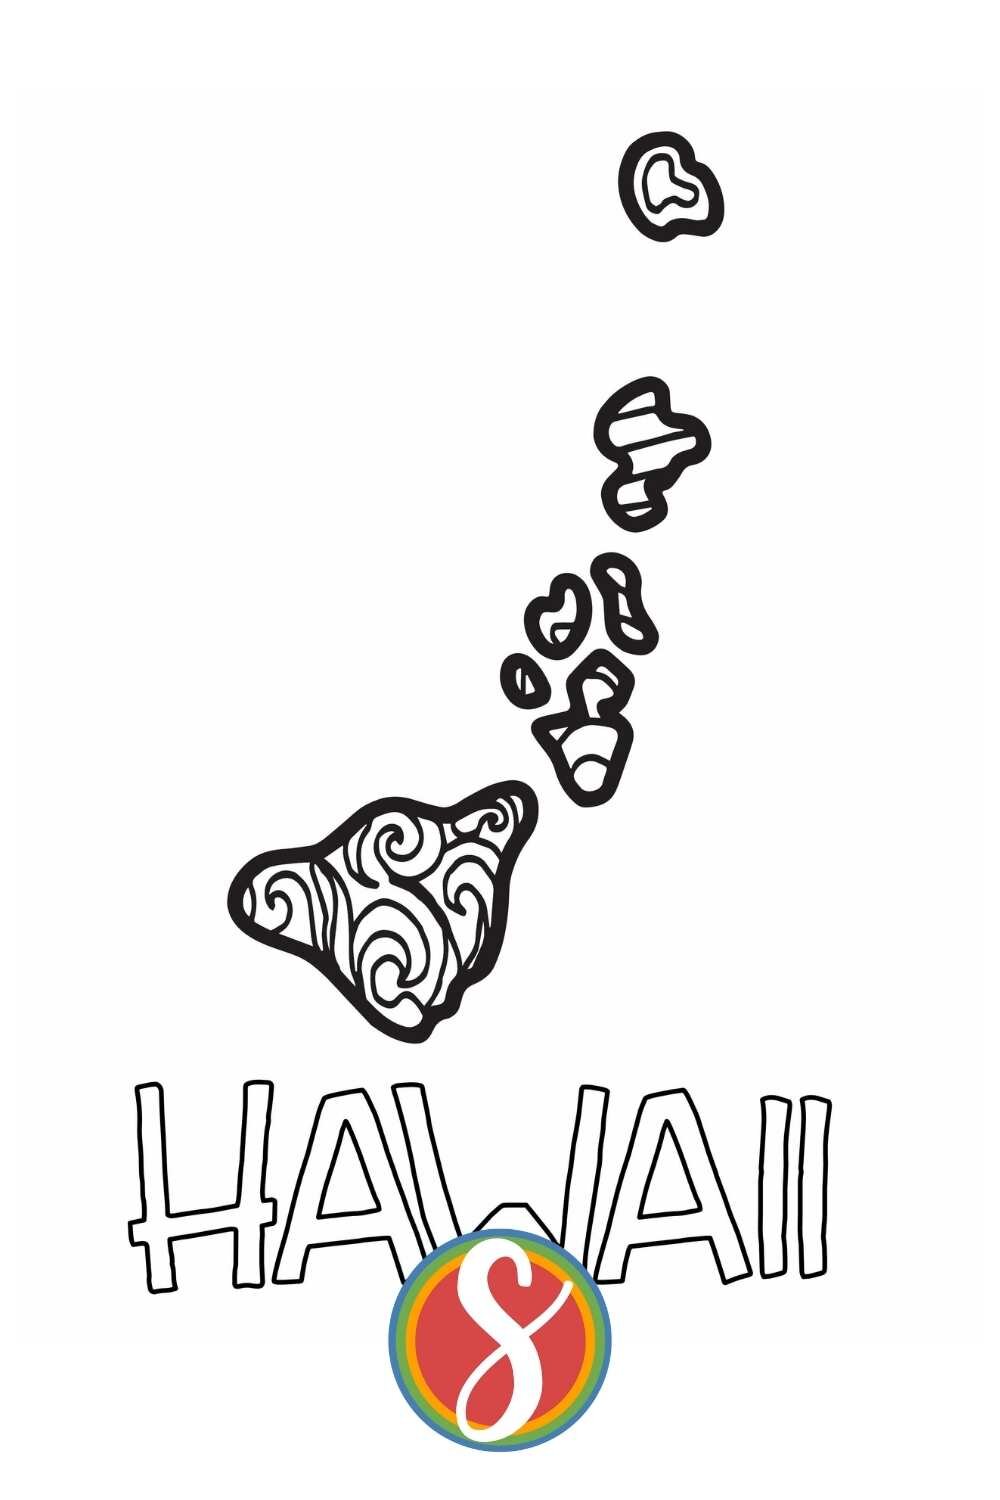 free-hawaii-printable-coloring-page-activities-stevie-doodles-free